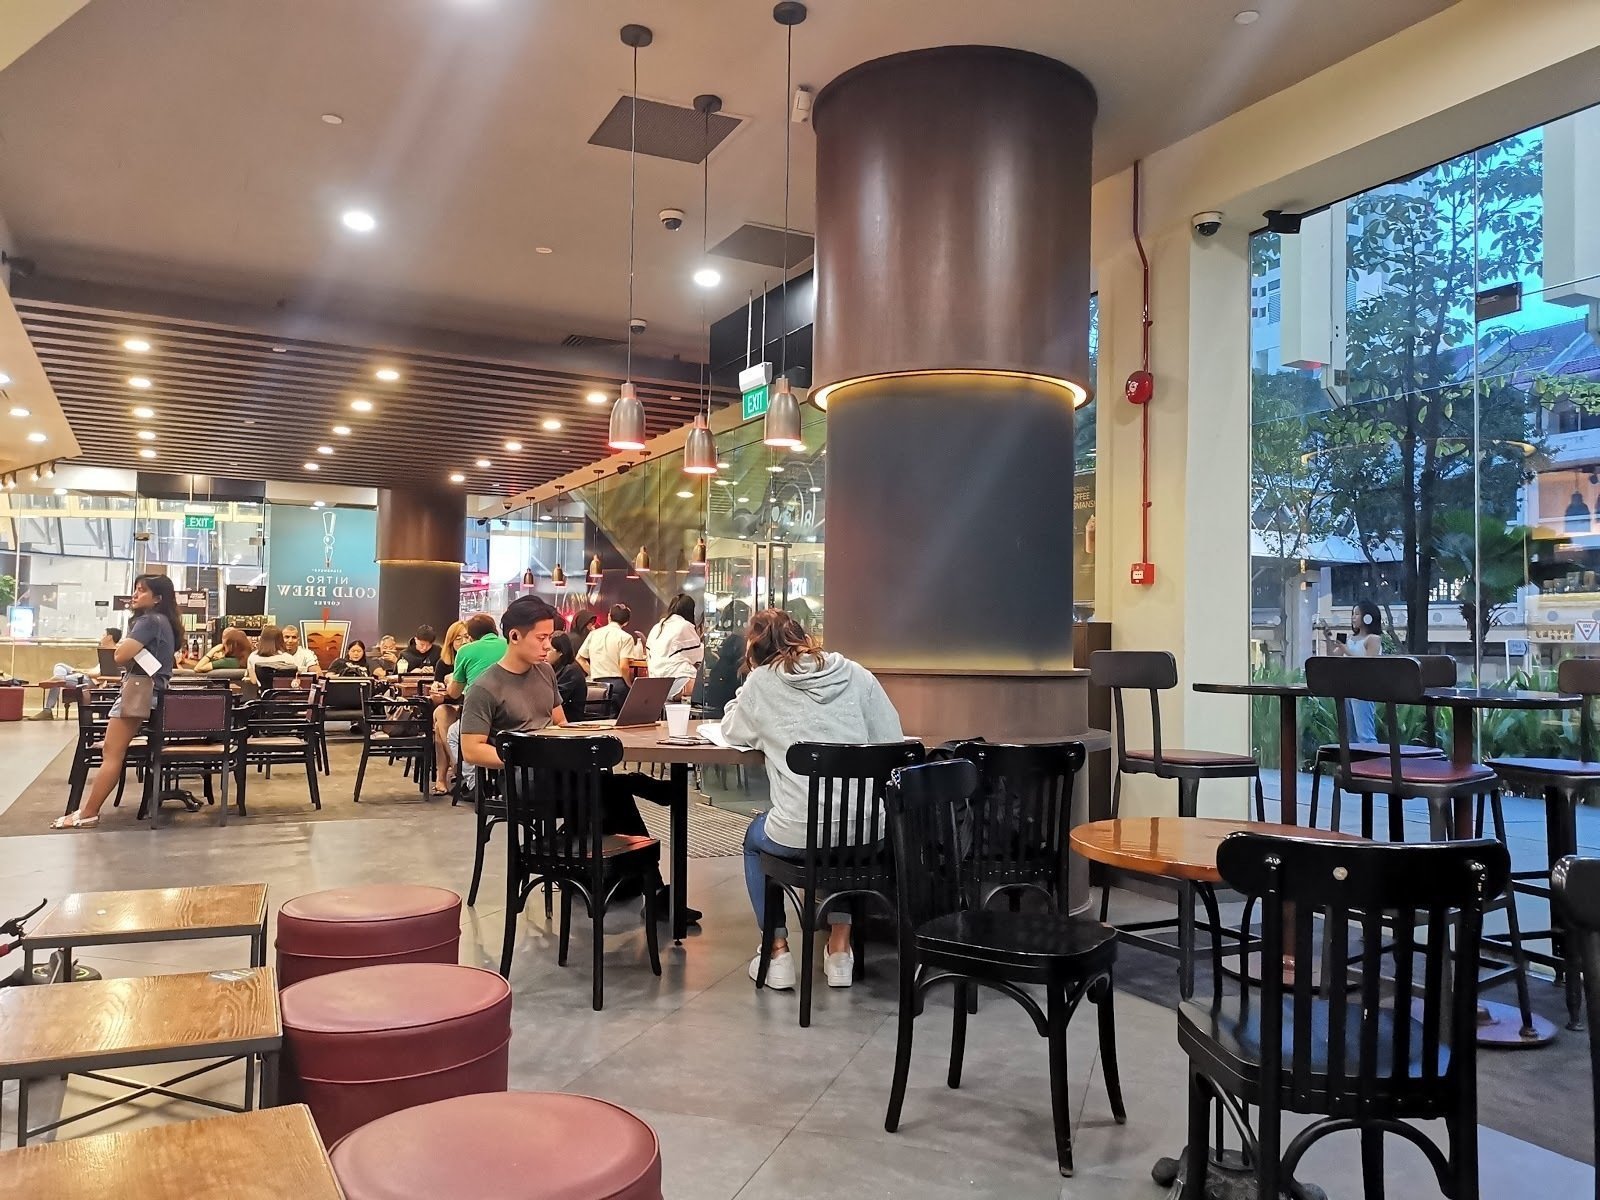 <span class="translation_missing" title="translation missing: en.meta.location_title, location_name: Starbucks Central, city: Singapore">Location Title</span>